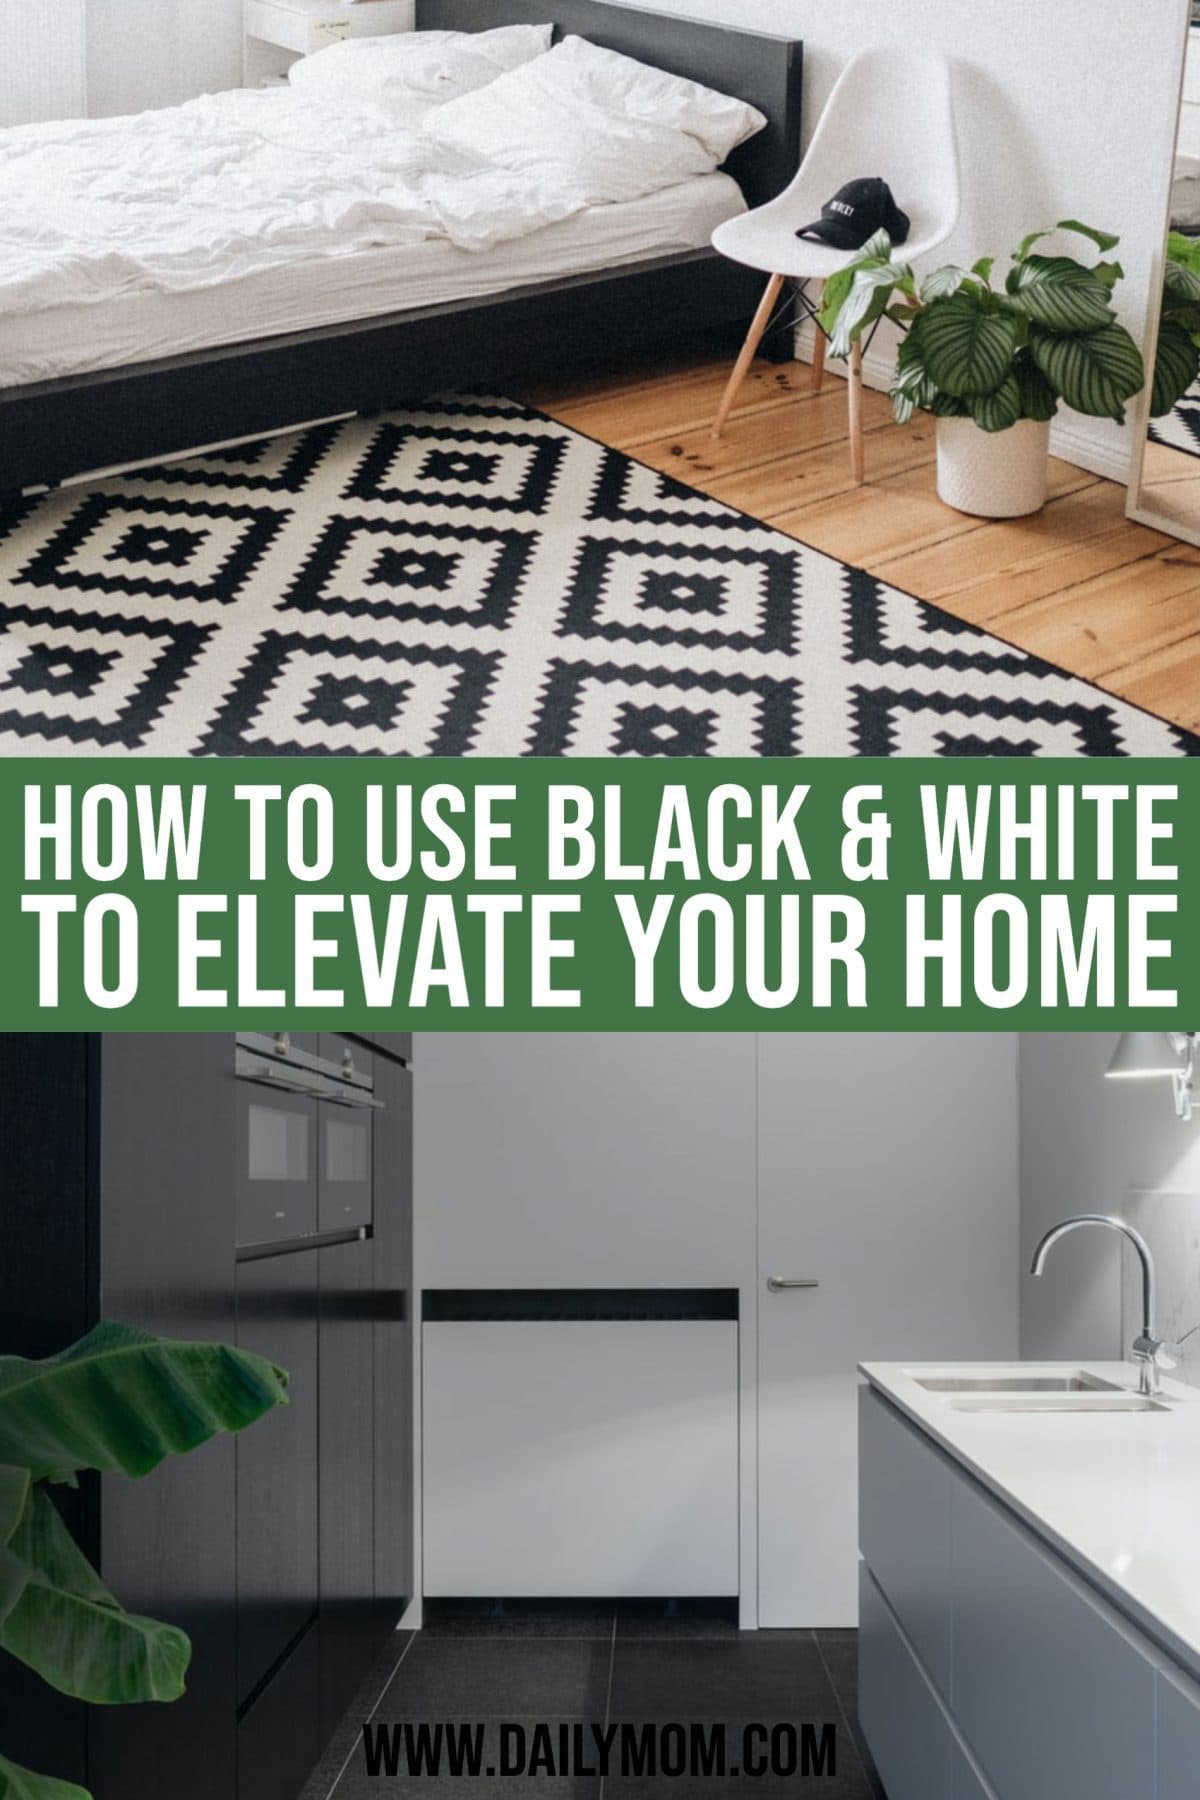 3 Compelling Reasons You Should Use Black And White Decor To Up-Level Your Home